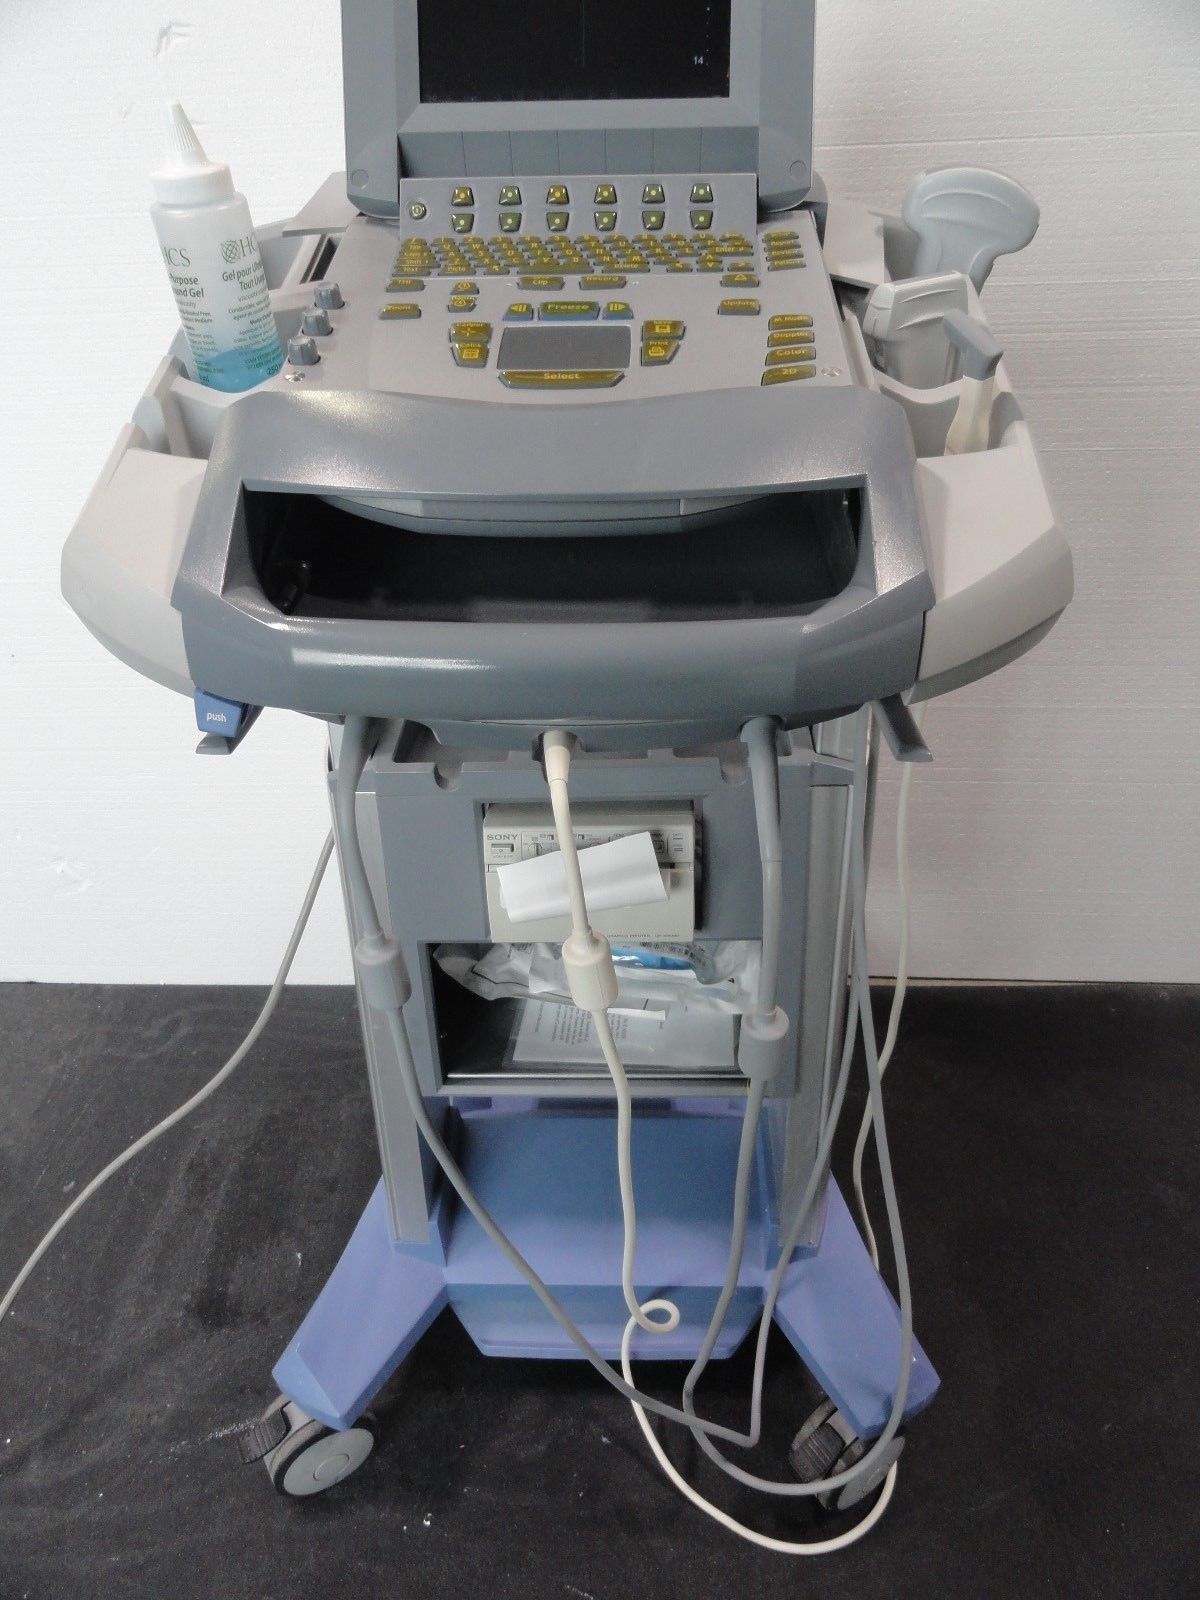 Sonosite Titan Portable Ultrasound Loaded unit with 3 probes transducers DIAGNOSTIC ULTRASOUND MACHINES FOR SALE